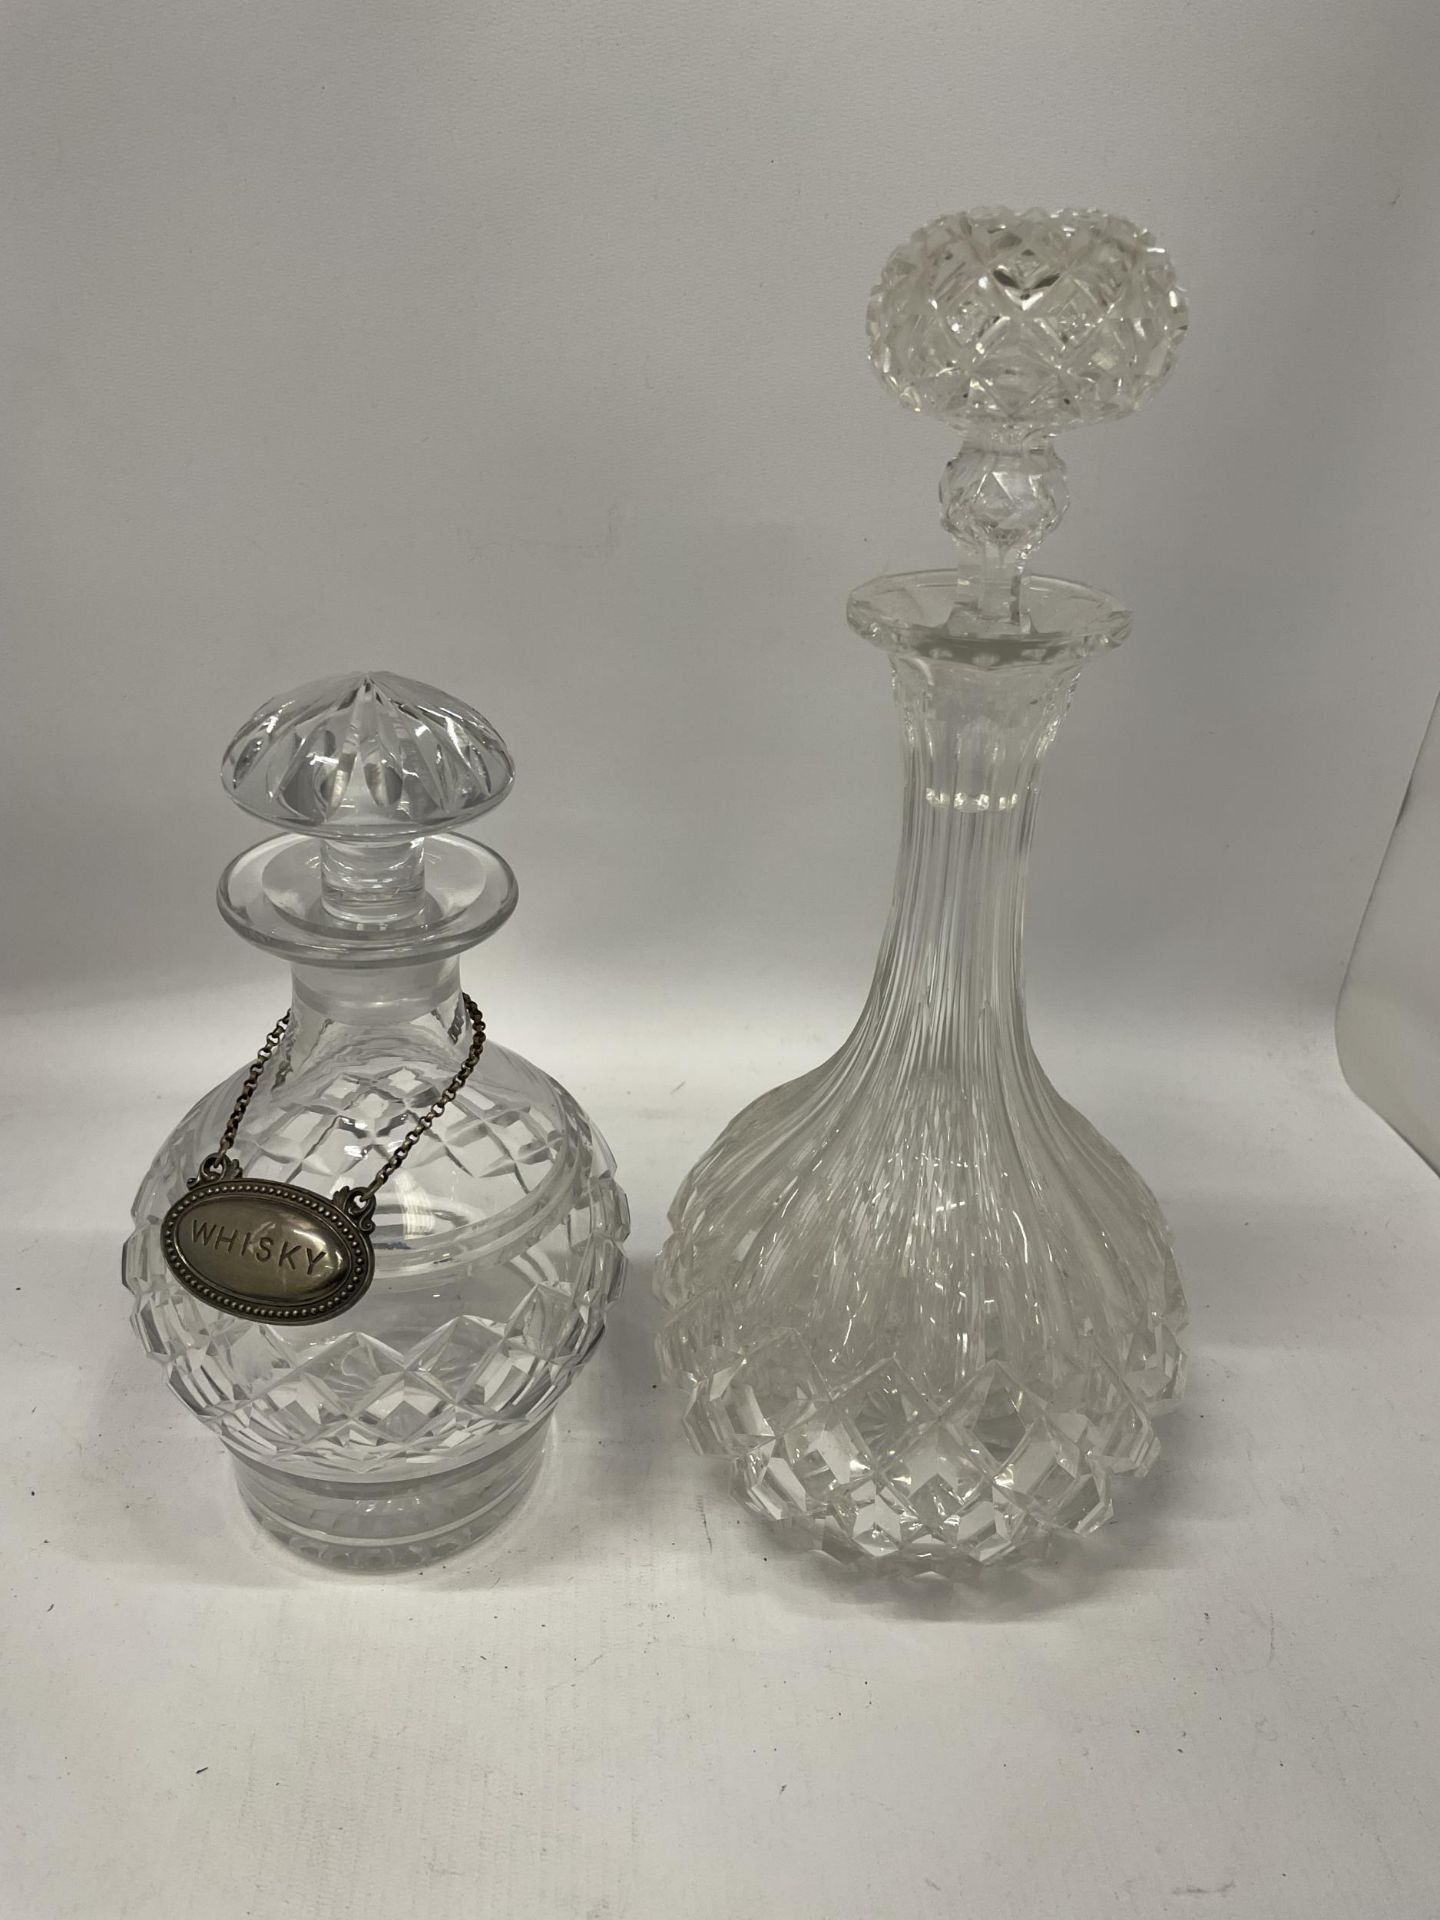 TWO CUT GLASS DECANTERS TOGETHER WITH A VINTAGE SILVER PLATED WHISKY DECANTER LABEL